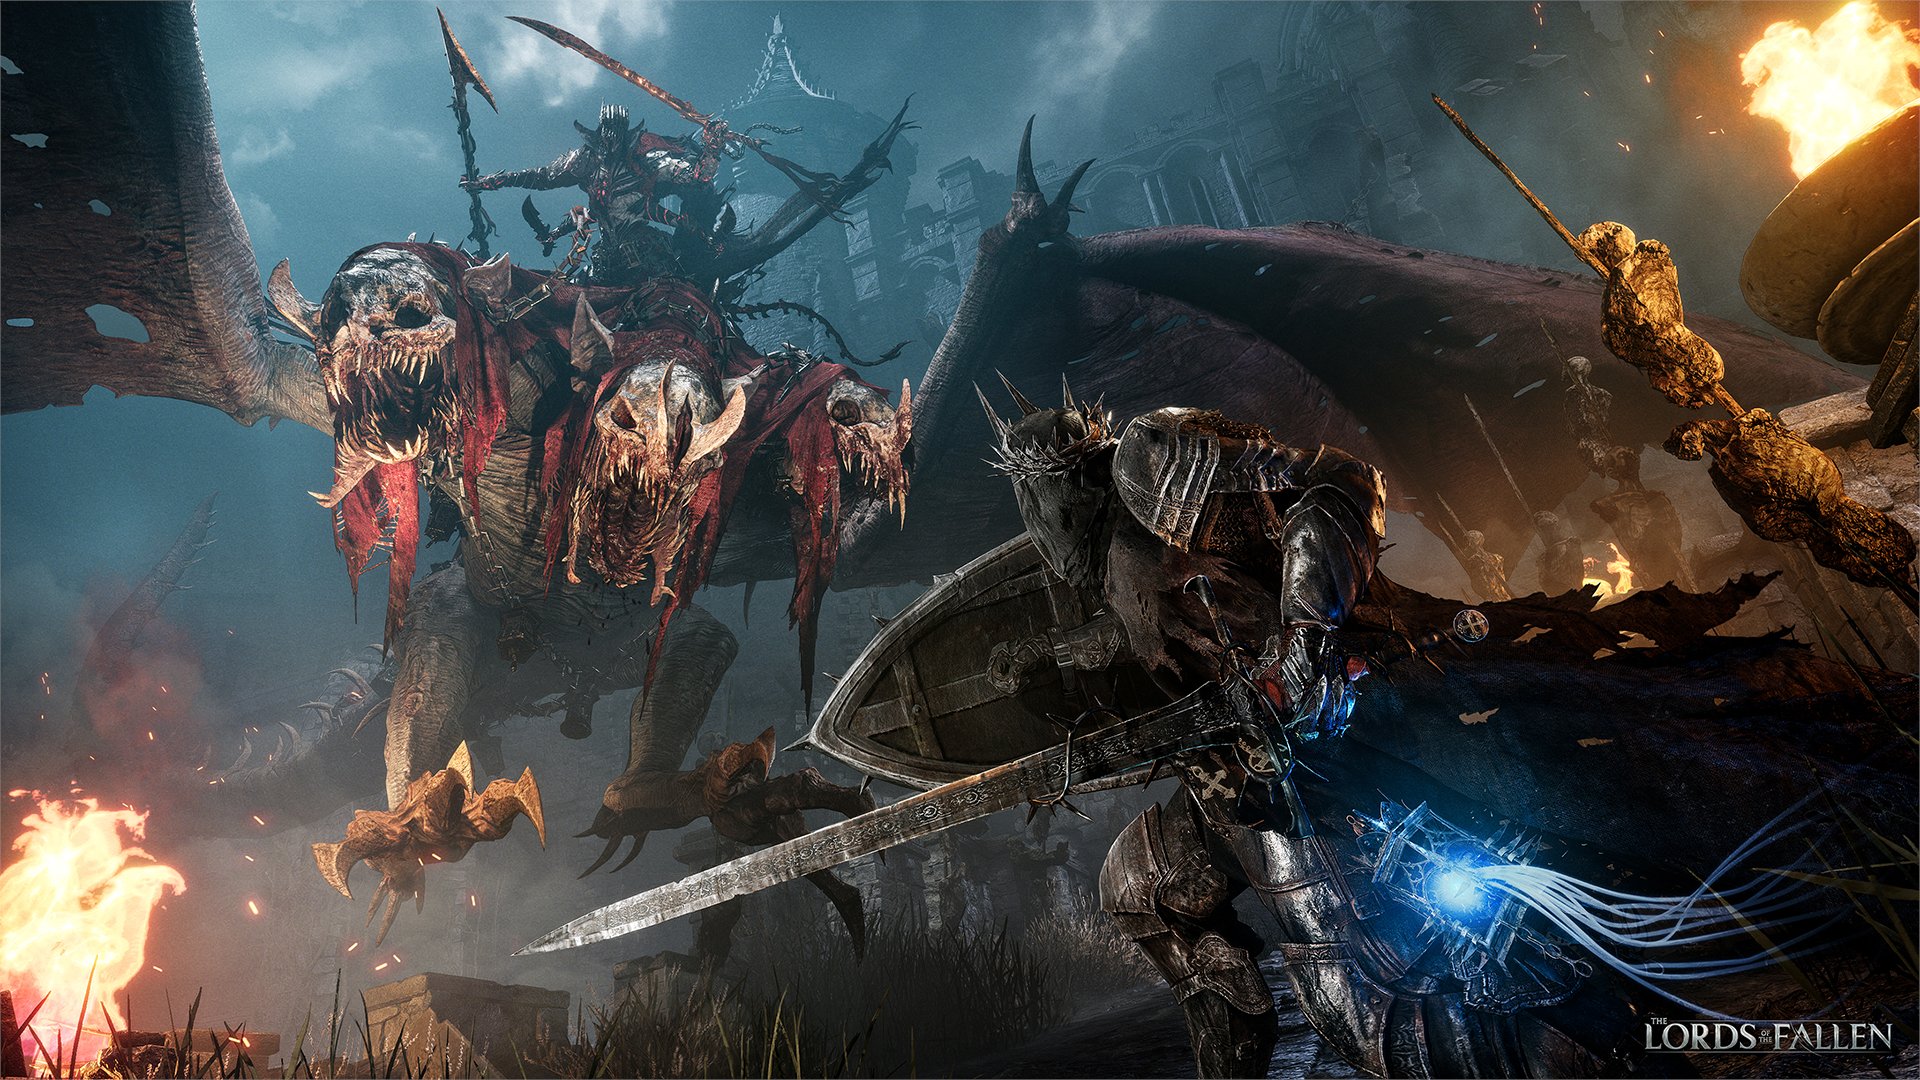 LORDS OF THE FALLEN on X: Only those of unwavering faith dare